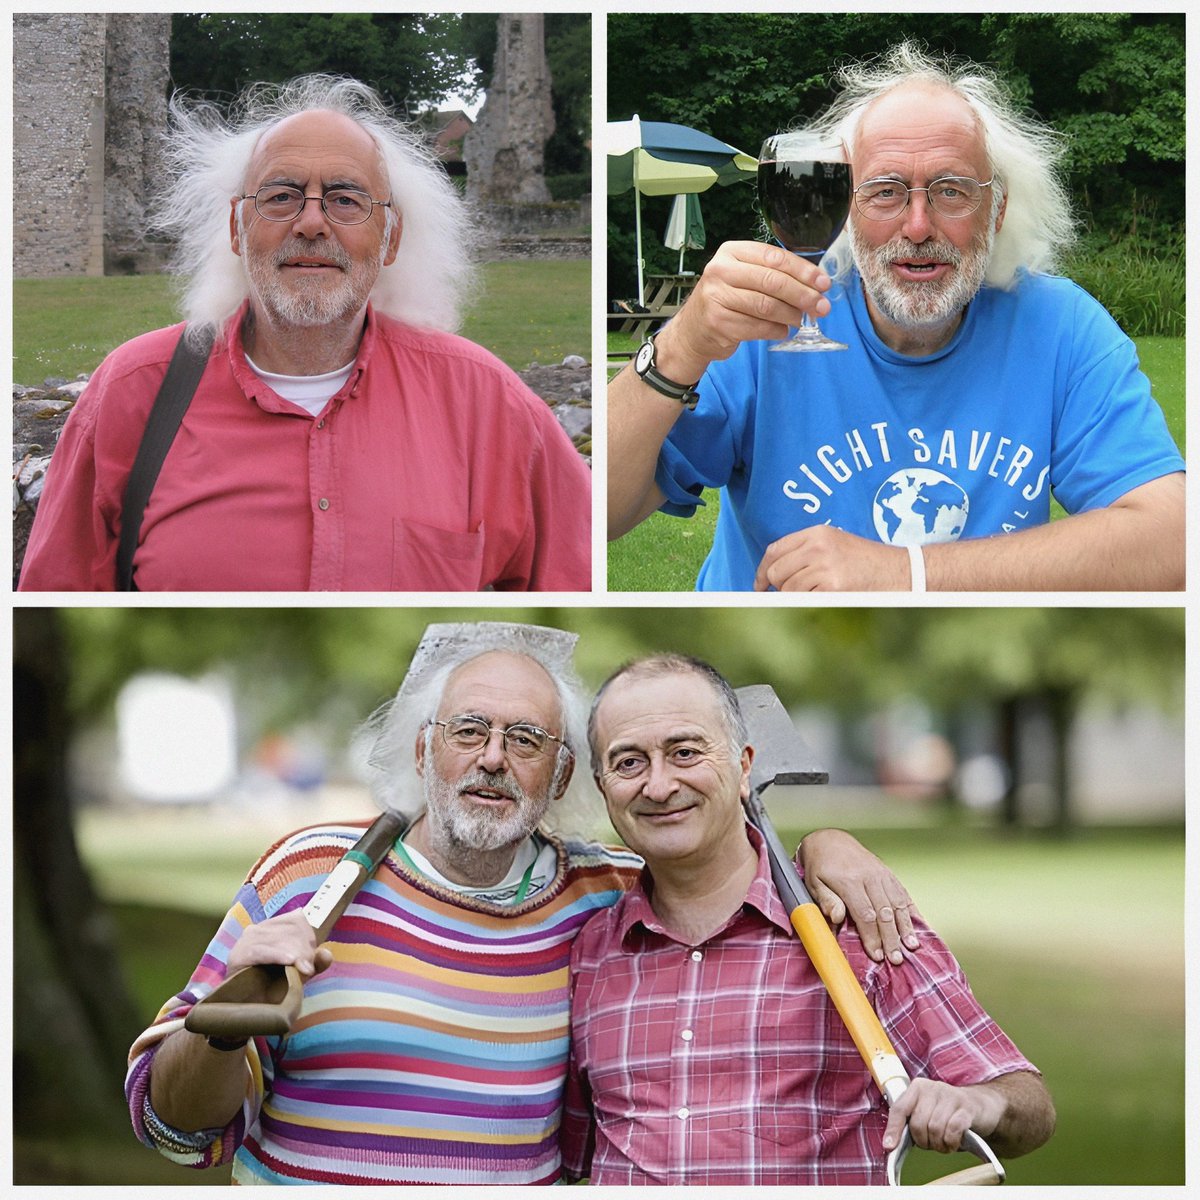 Remembering the late Archaeologist, Mick Aston FSA (1 July 1946 – 24 June 2013)